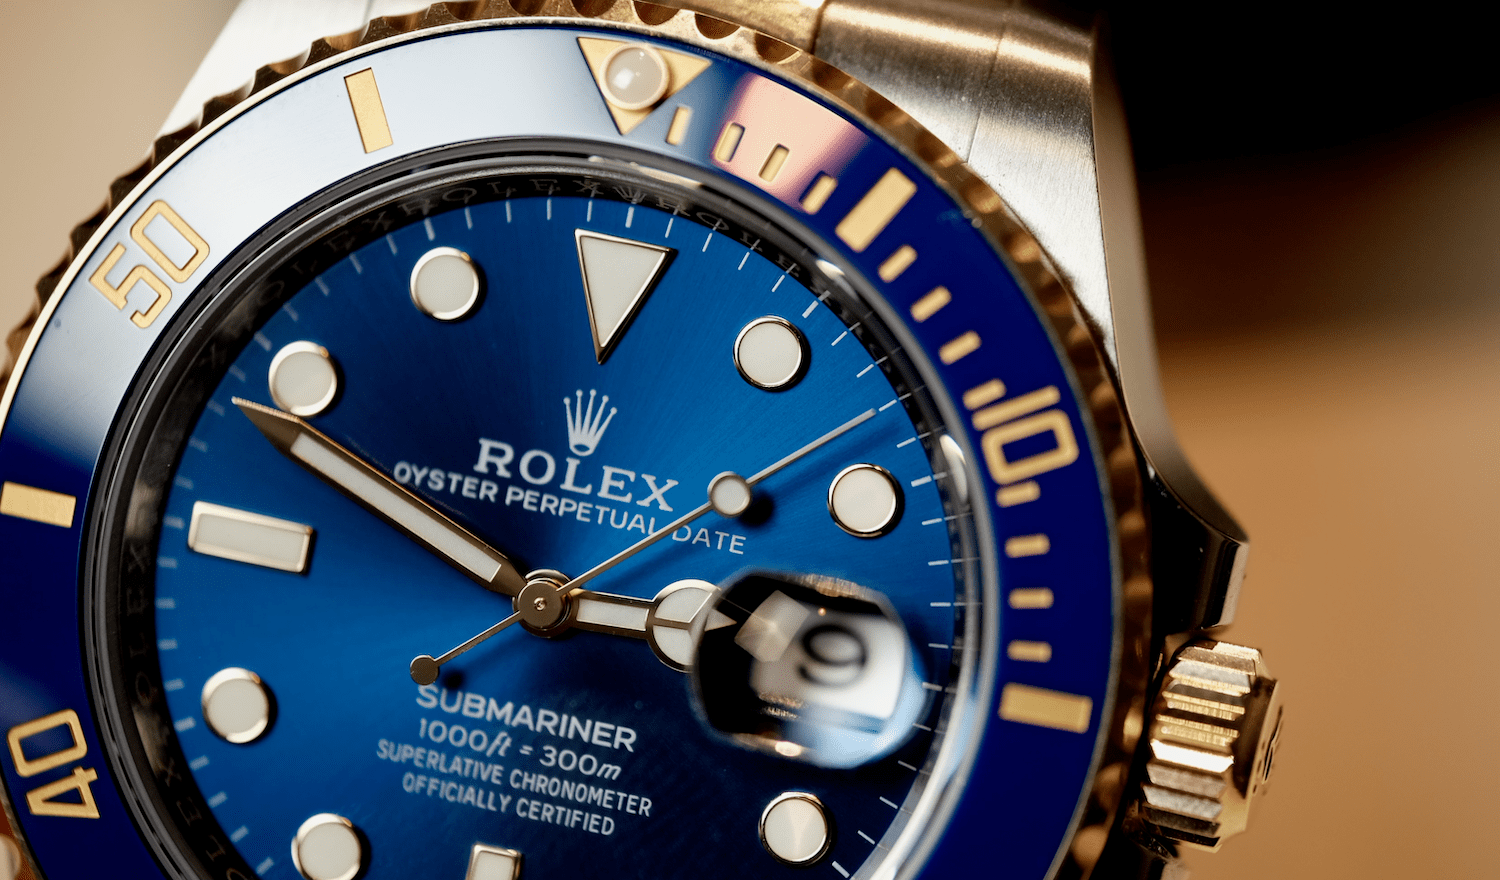 Close up details of the Rolex Submariner Date watch